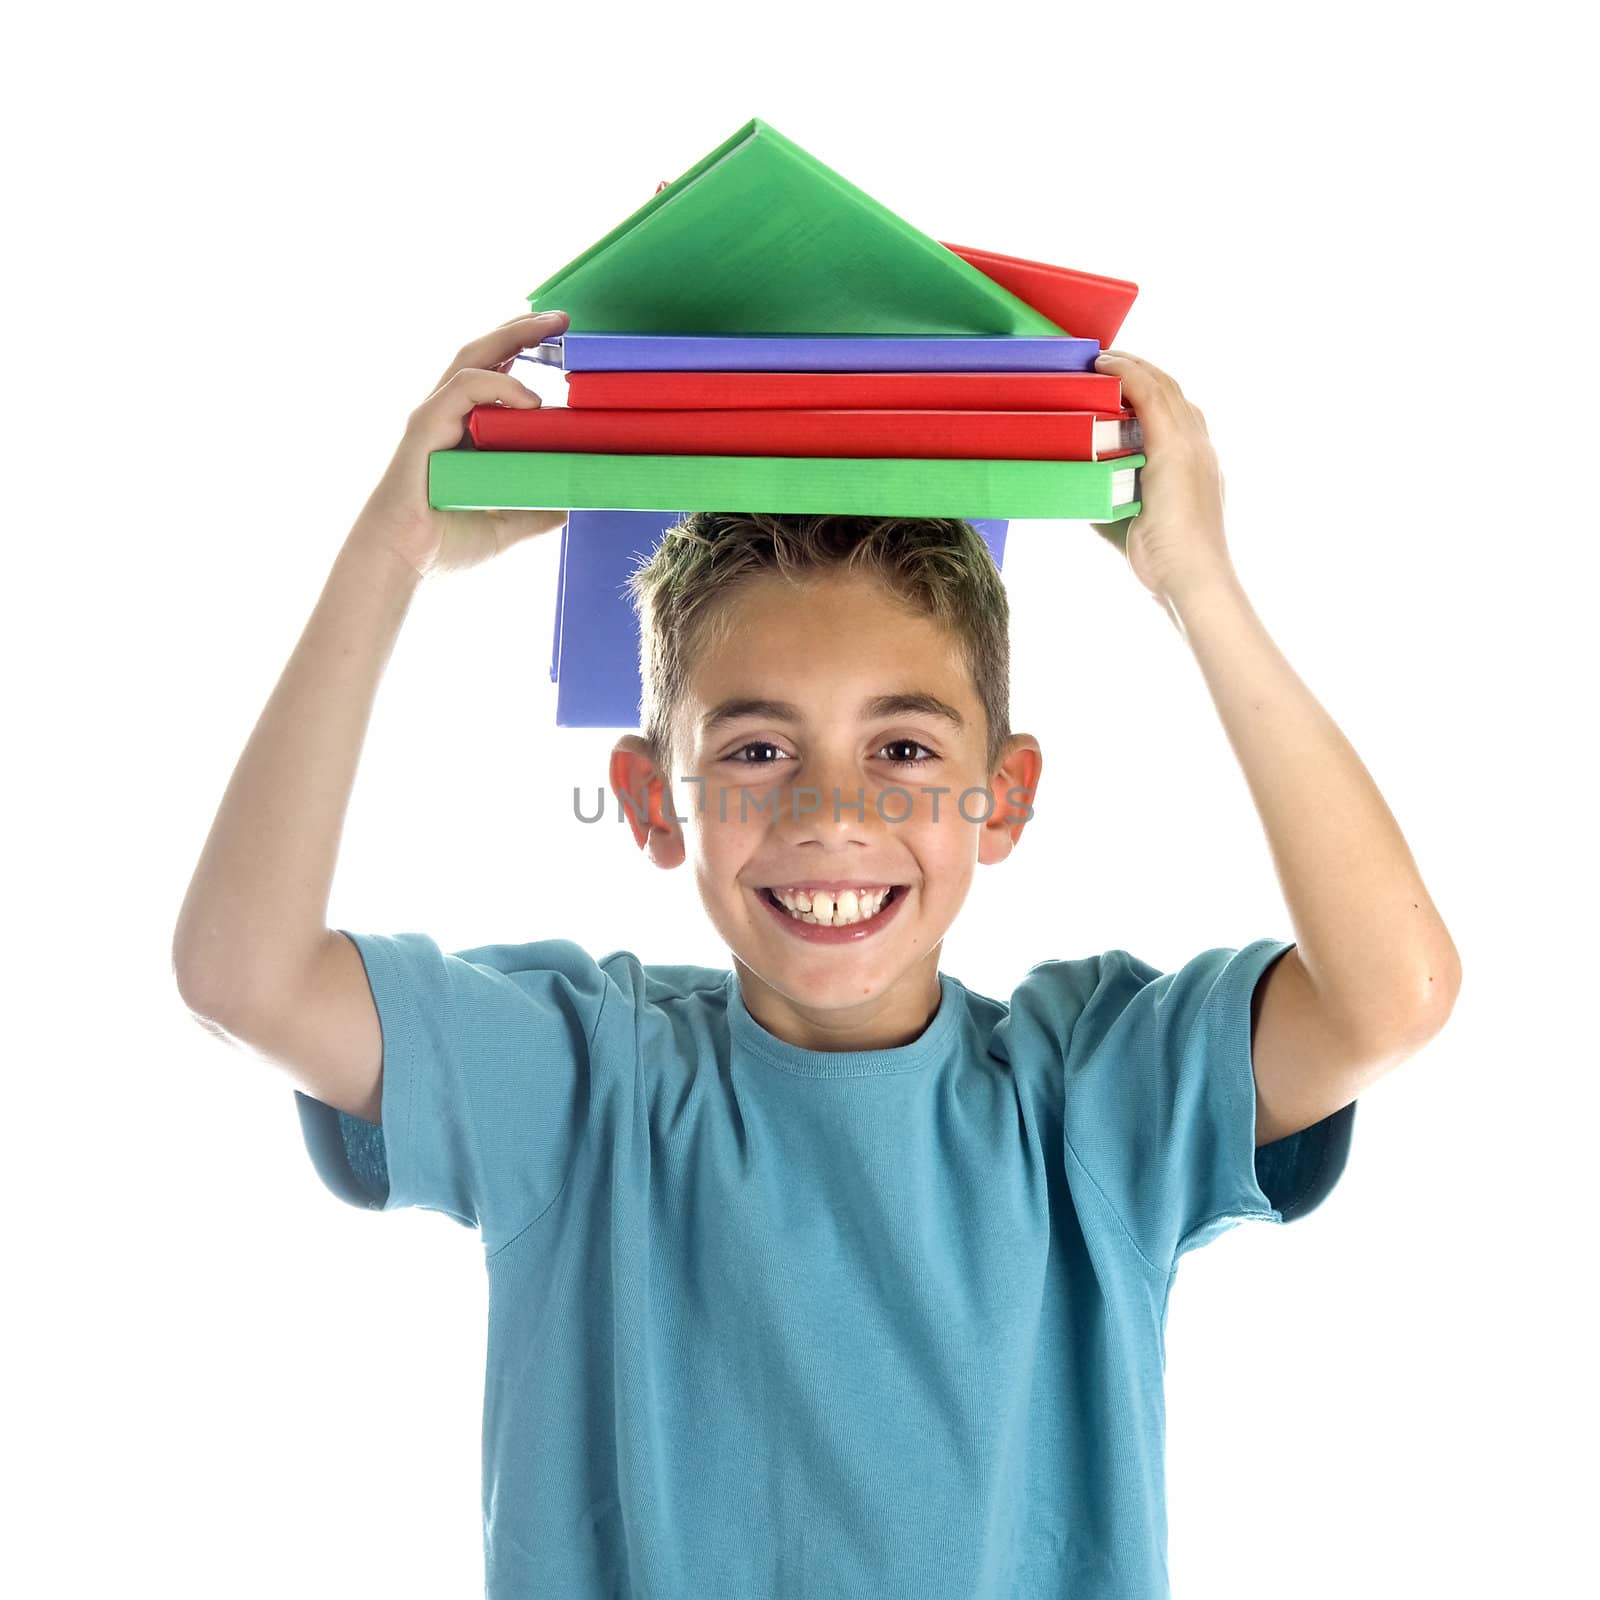 a boy with a pile of falling books on his head